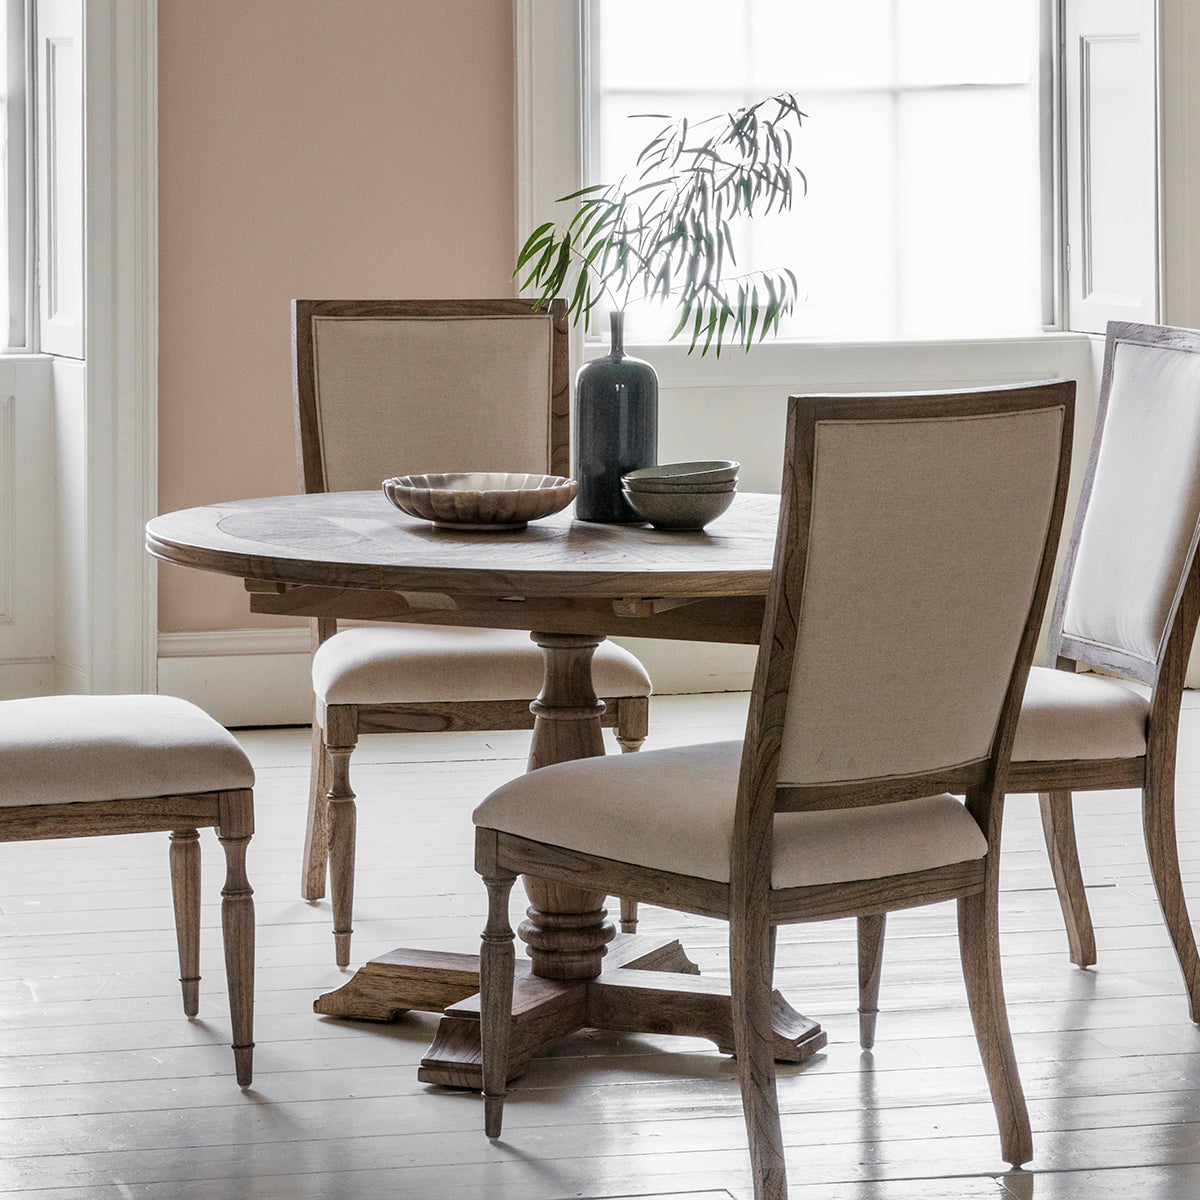 A Belsford Round Extendable Dining Table and four chairs in a room by Kikiathome.co.uk, perfect for home furniture and interior decor.